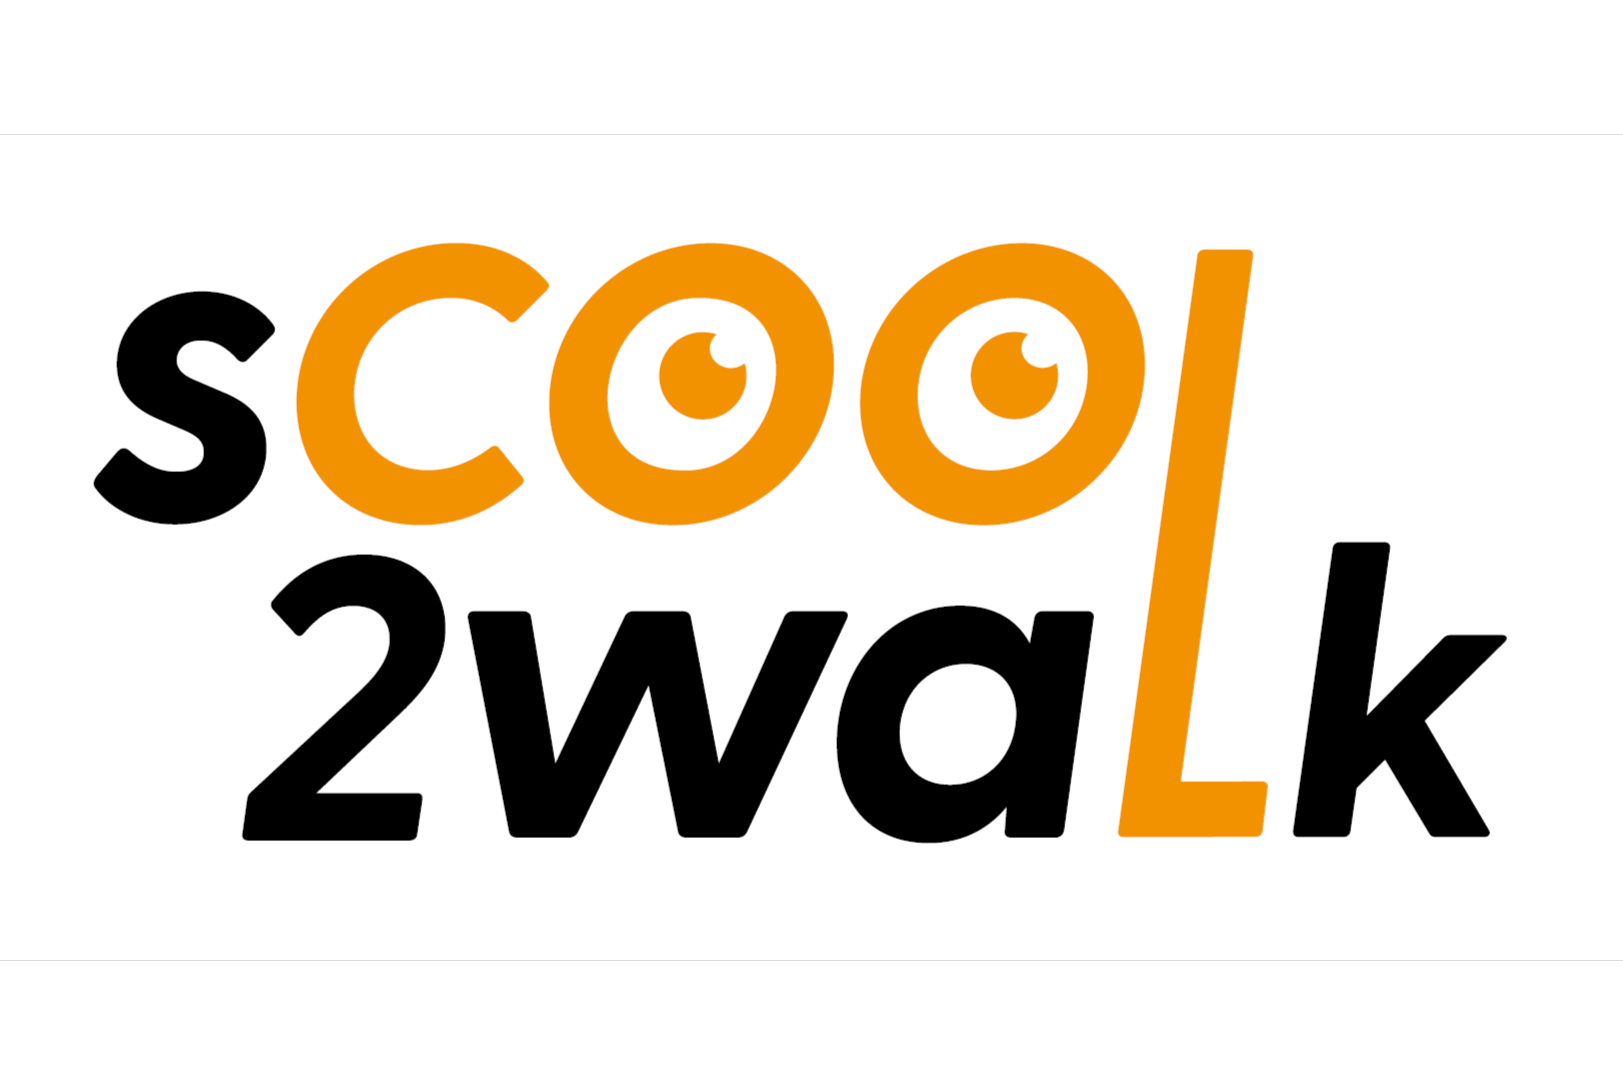 sCOOL2walk: Promoting Walkability for Children and Youth